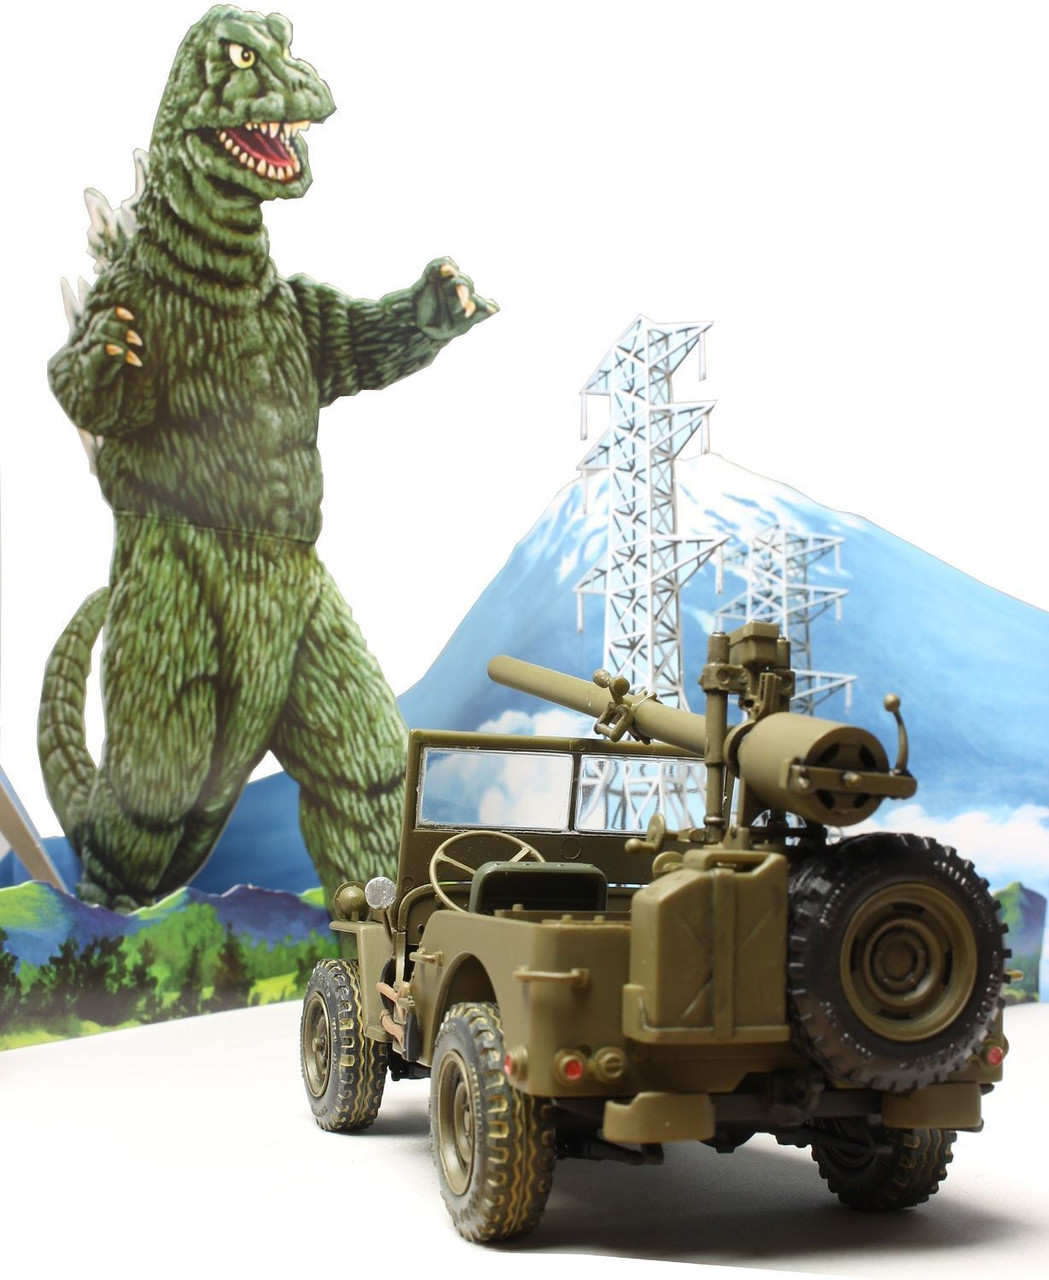 Godzilla Invasion of Astro Monster 1/25 Scale Plastic Assembly Kit